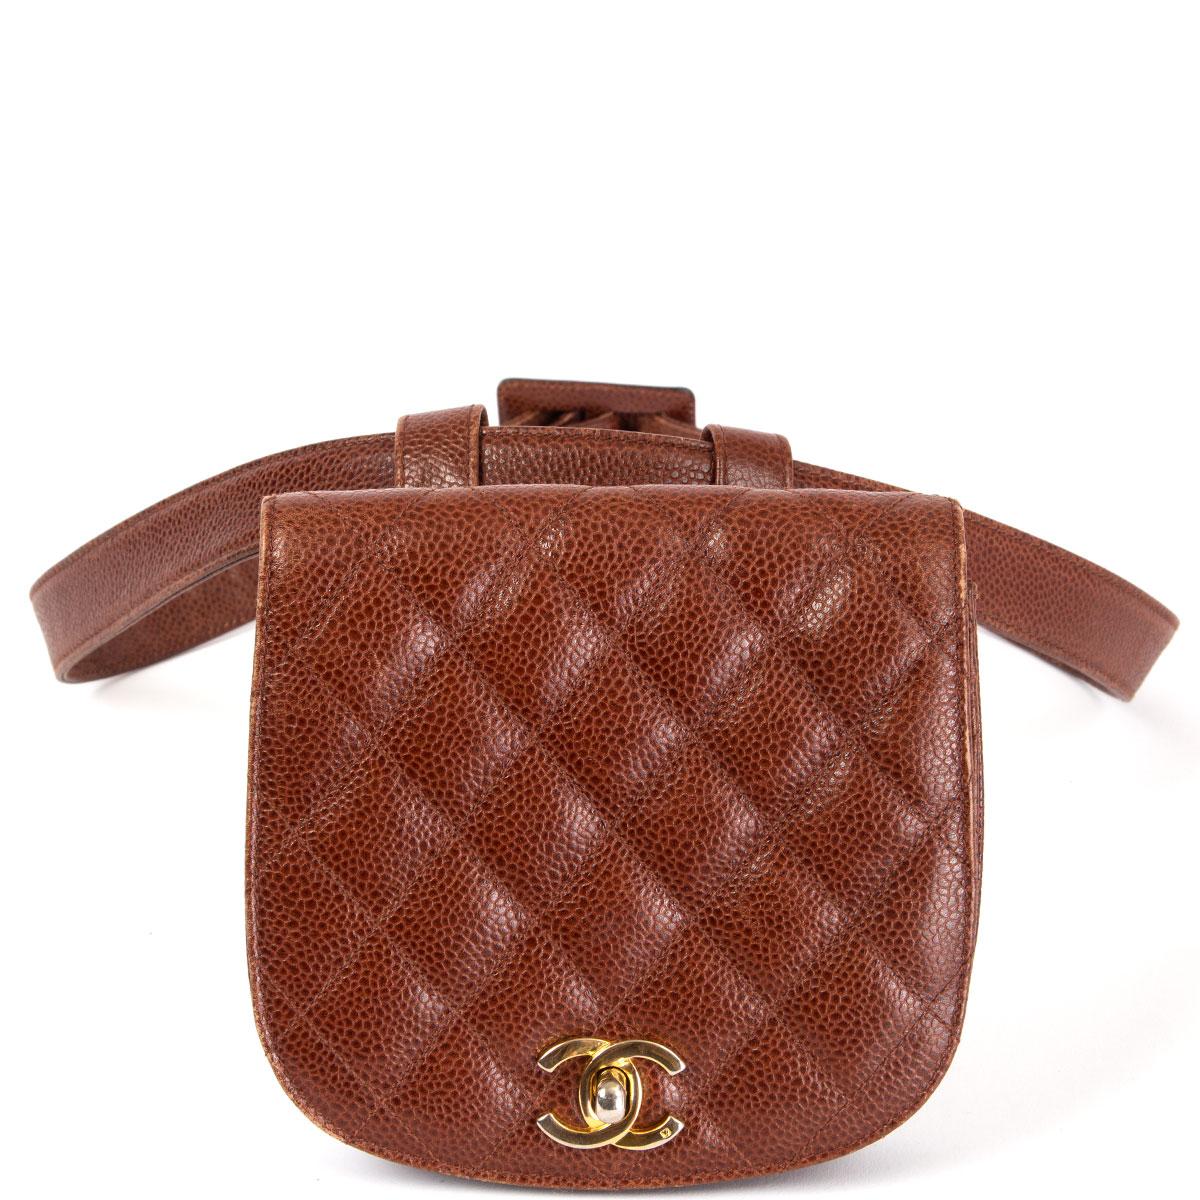 100% authentic Chanel 1990s quilted CC belt bag in chestnut brown caviat leather that's been stitched with the brand's iconic diamond quilting. Opens with the signature CC turn-lock and is lined in chestnut brown leather with one internal zip pocket